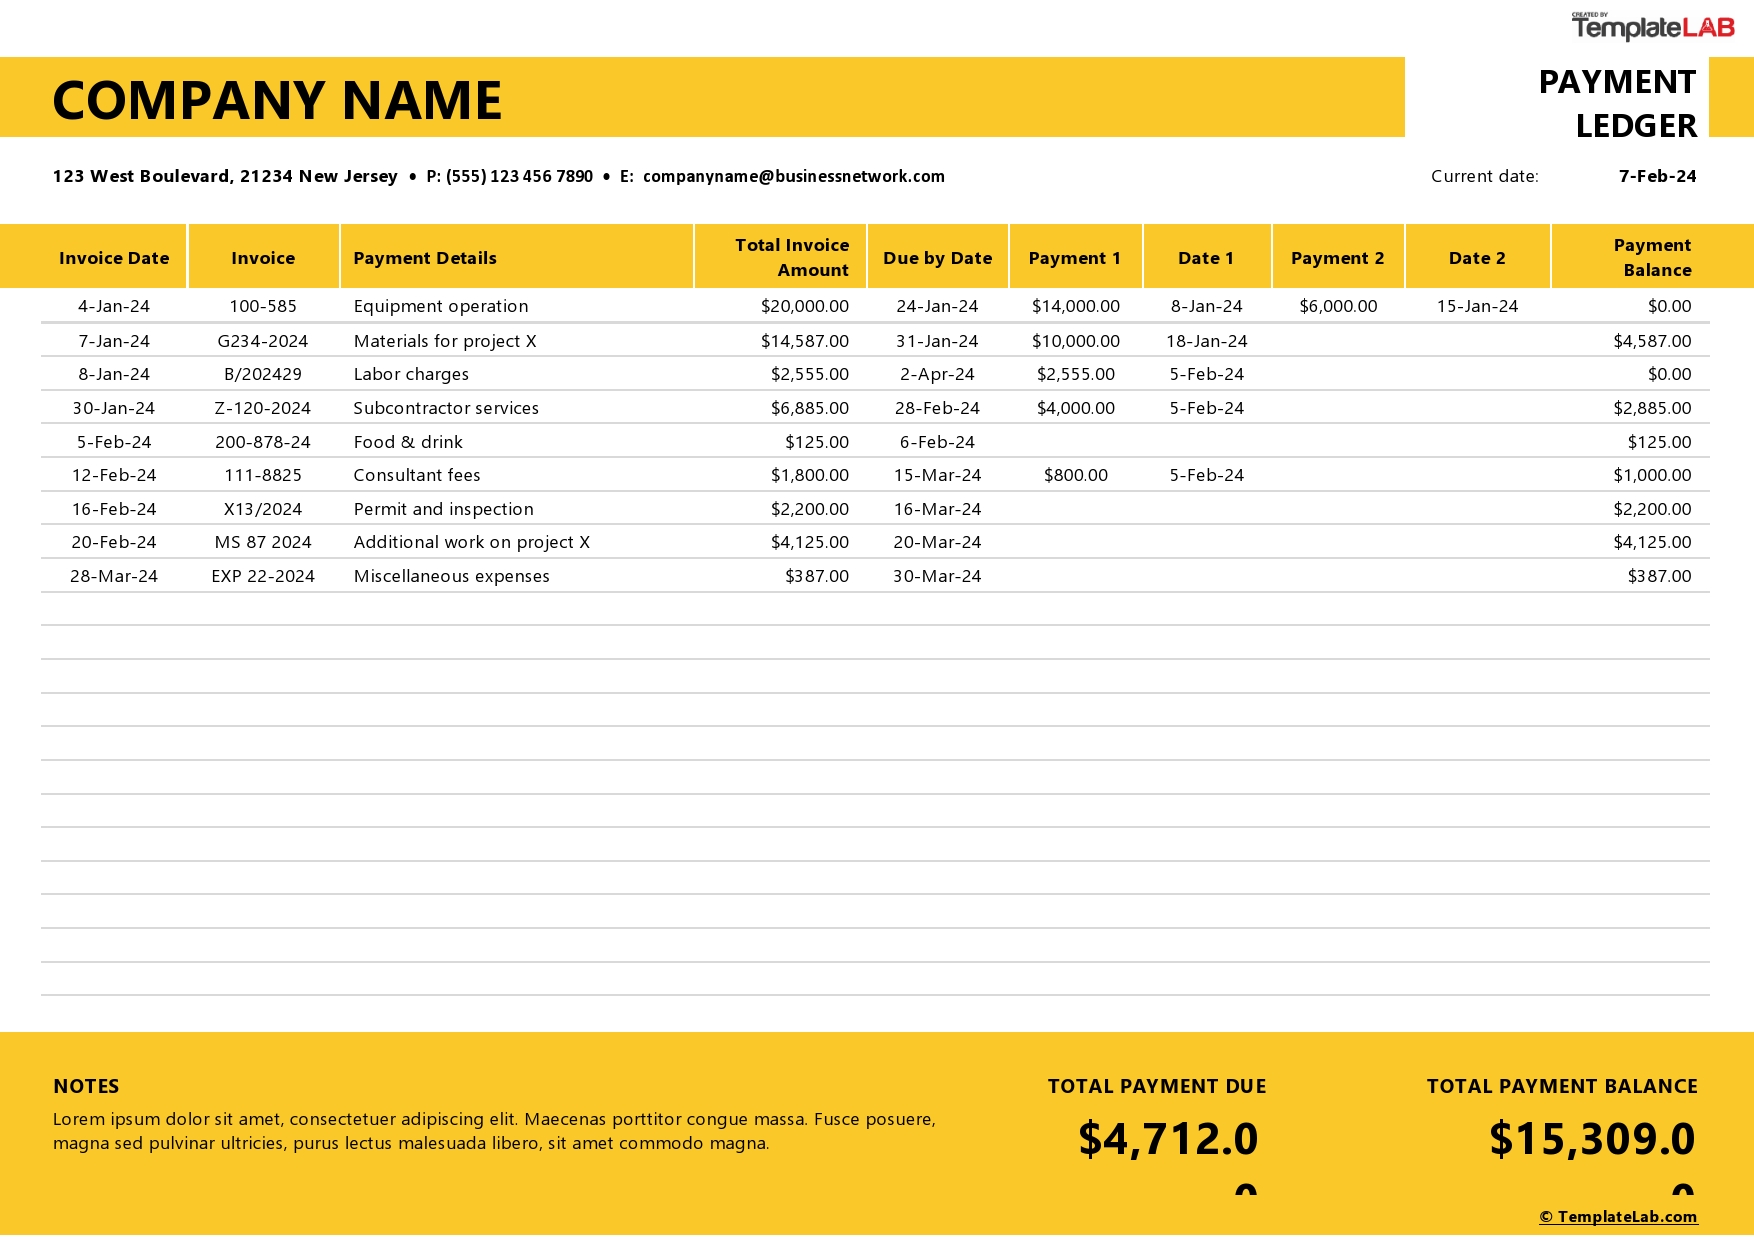 Free Payment Ledger Template